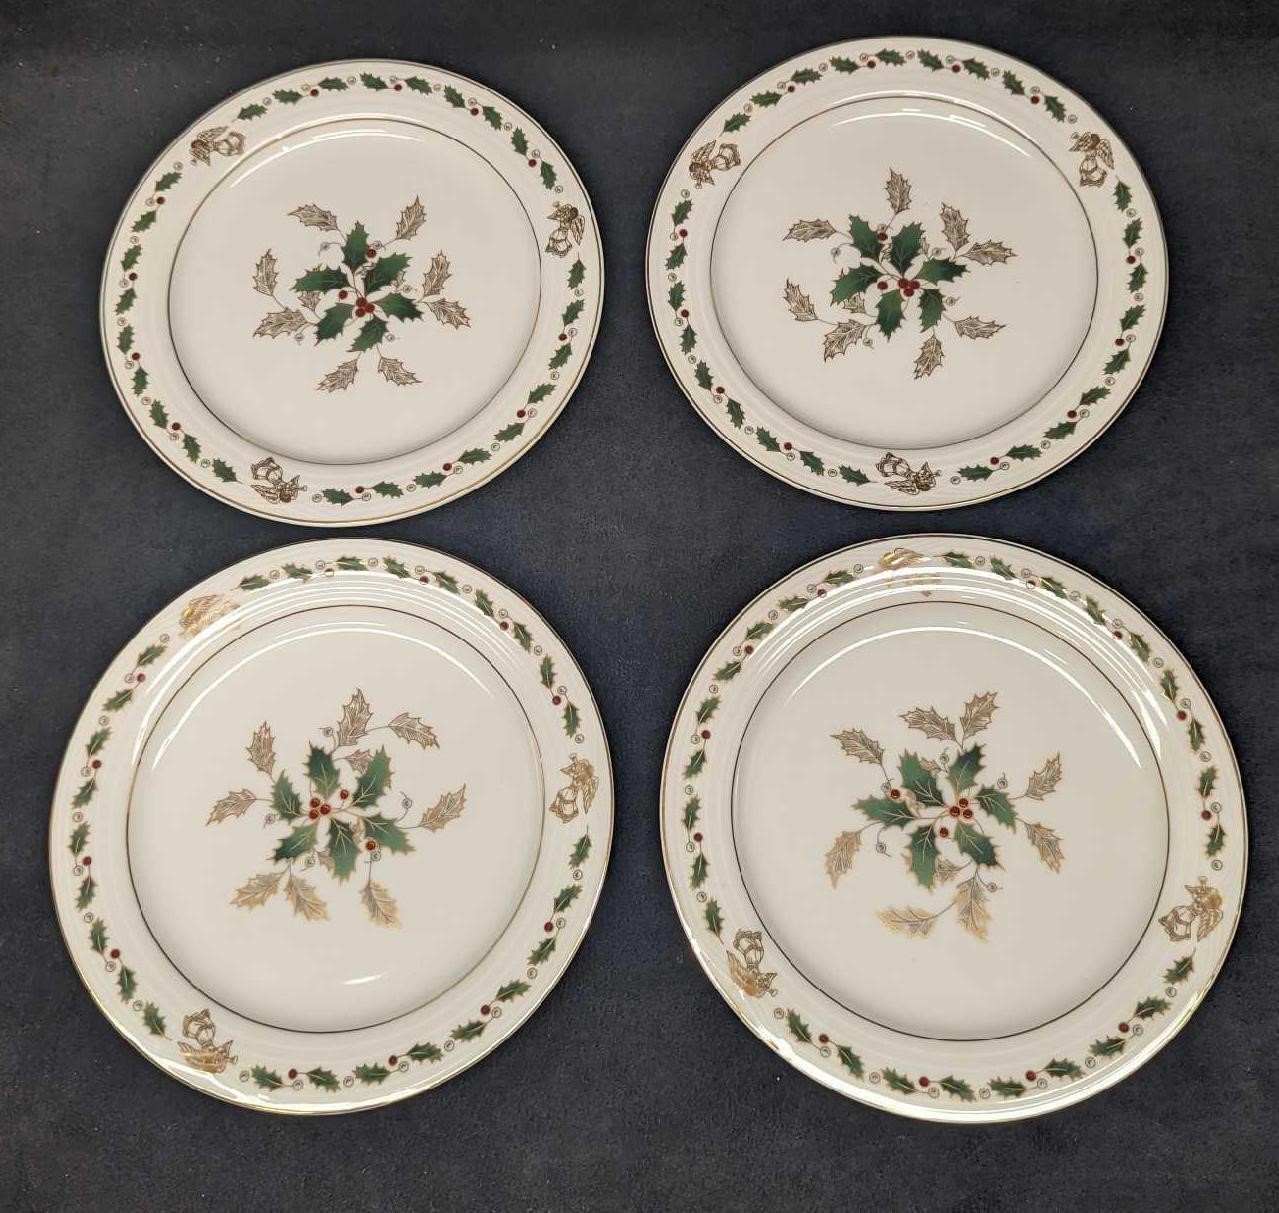 4 Retired Holly By Noritake Fine China Salad Plate